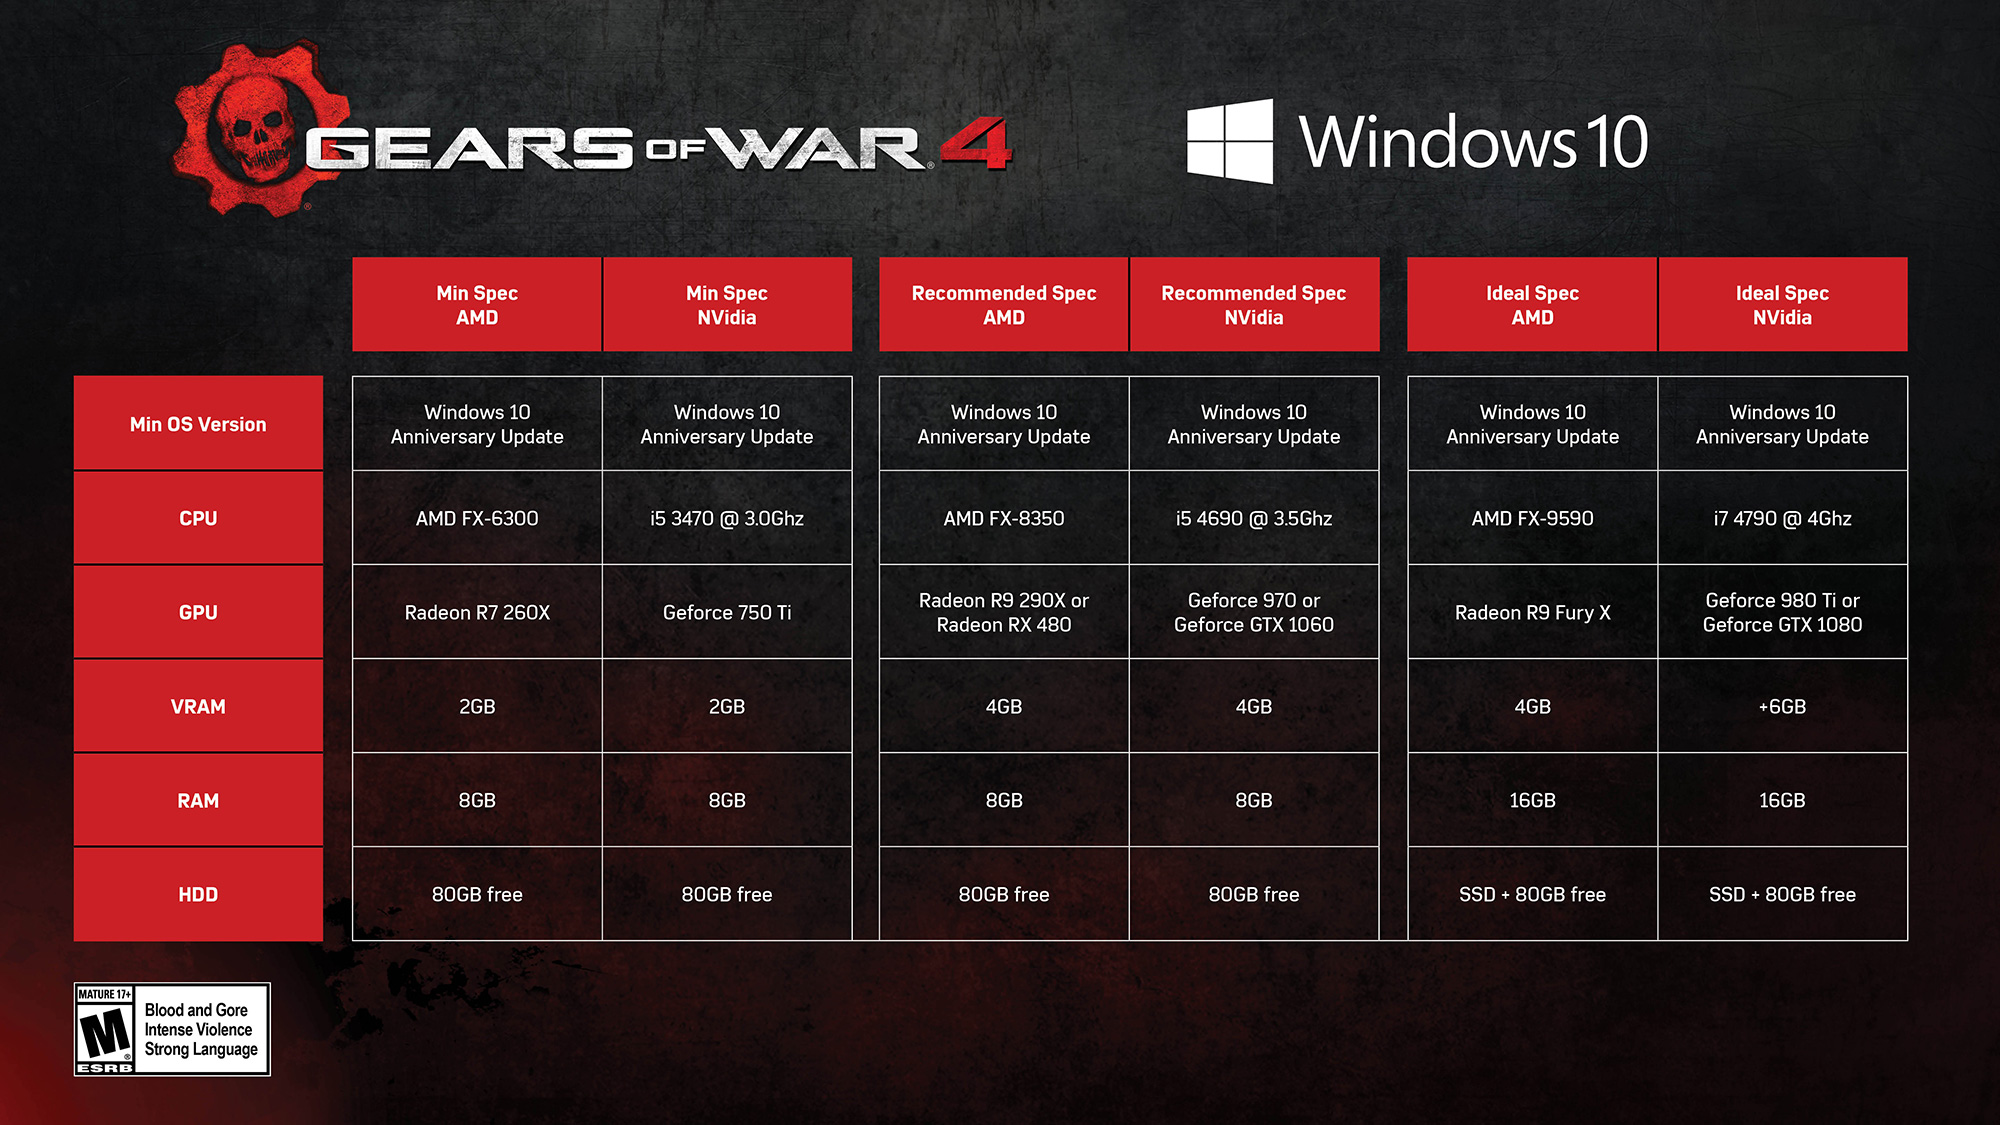 Media asset in full size related to 3dfxzone.it news item entitled as follows: Gears of War 4: requisiti di sistema e gameplay in 4K con GeForce GTX 1080 | Image Name: news24788_gears-war-4-system-specs_1.jpg